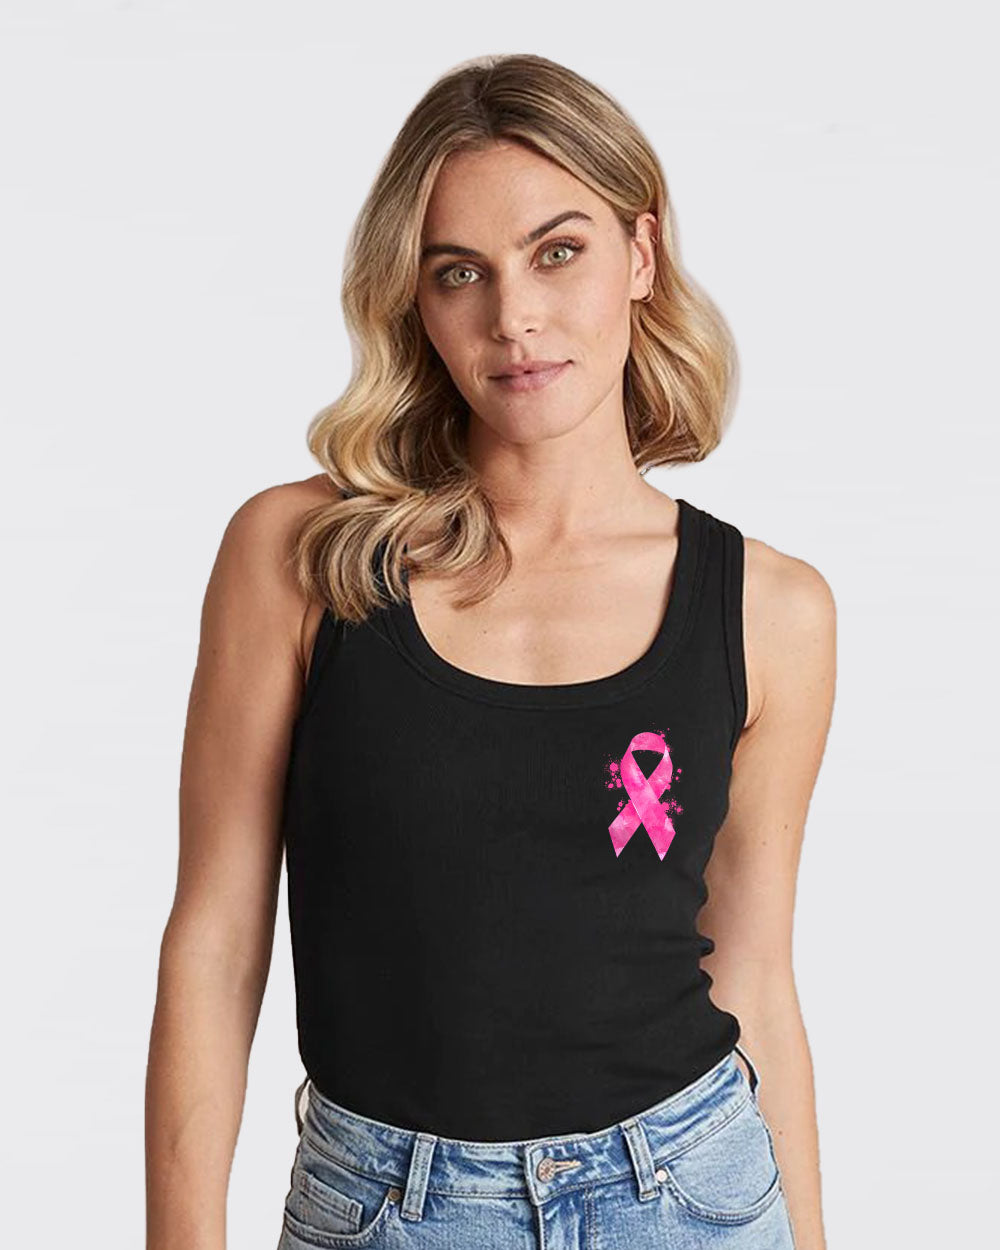 I Am A Breast Cancer Warrior Cross Ribbon Flag Women's Breast Cancer Awareness Tanks